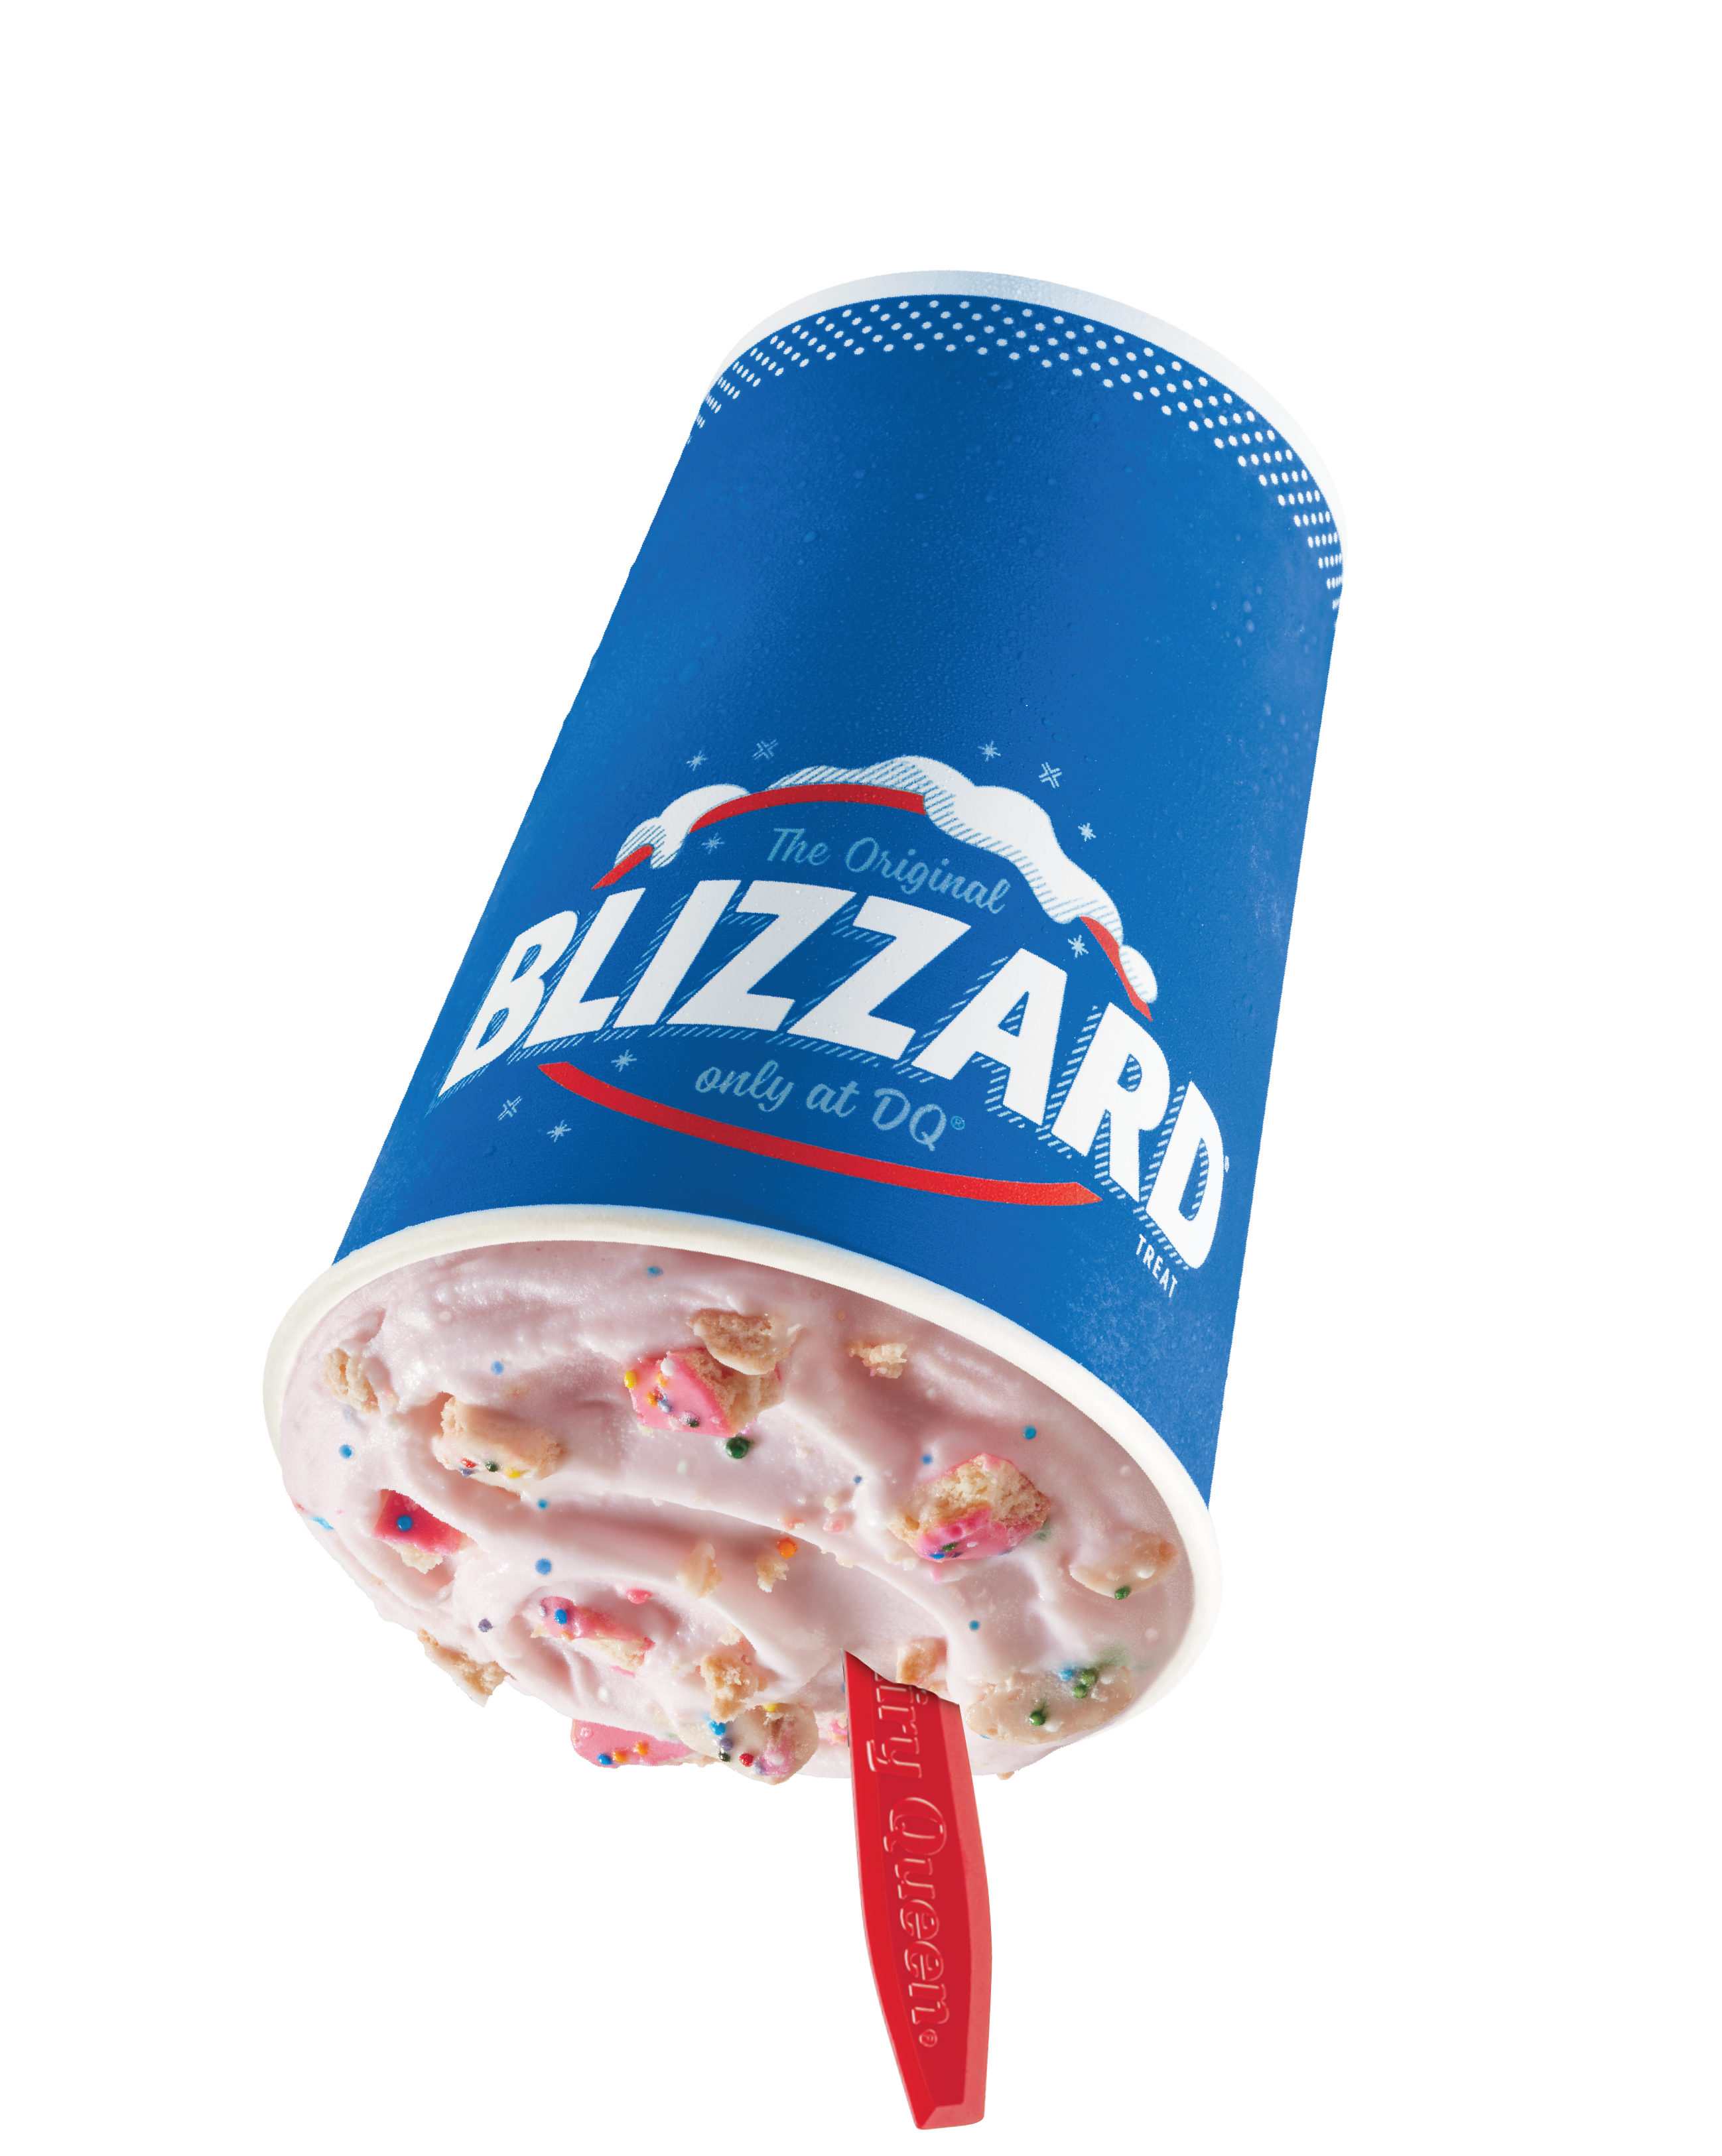 Frosted-Animal cracker blizzard dq